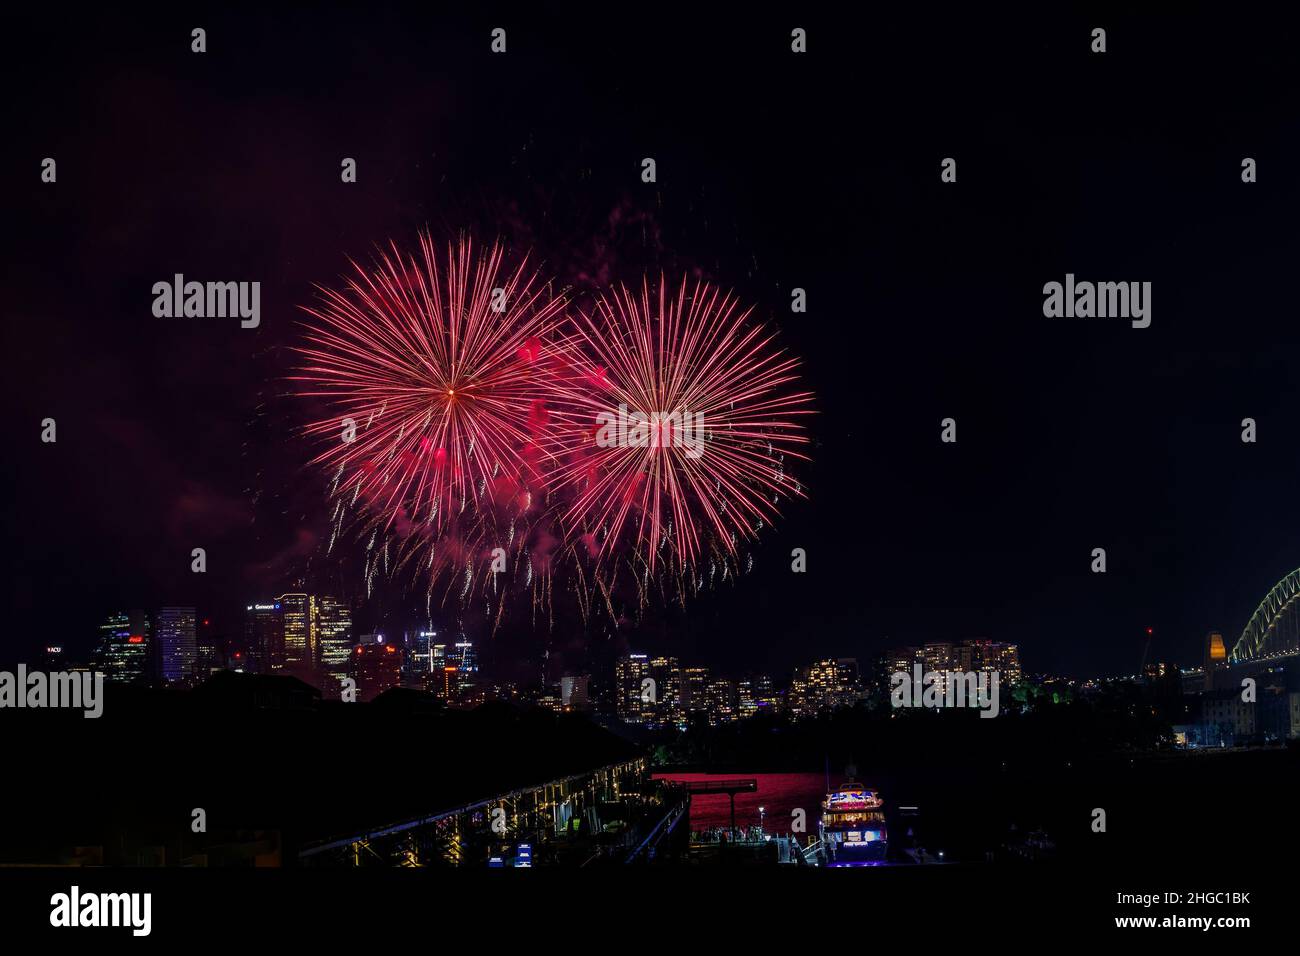 Fire Works in the City Stock Photo